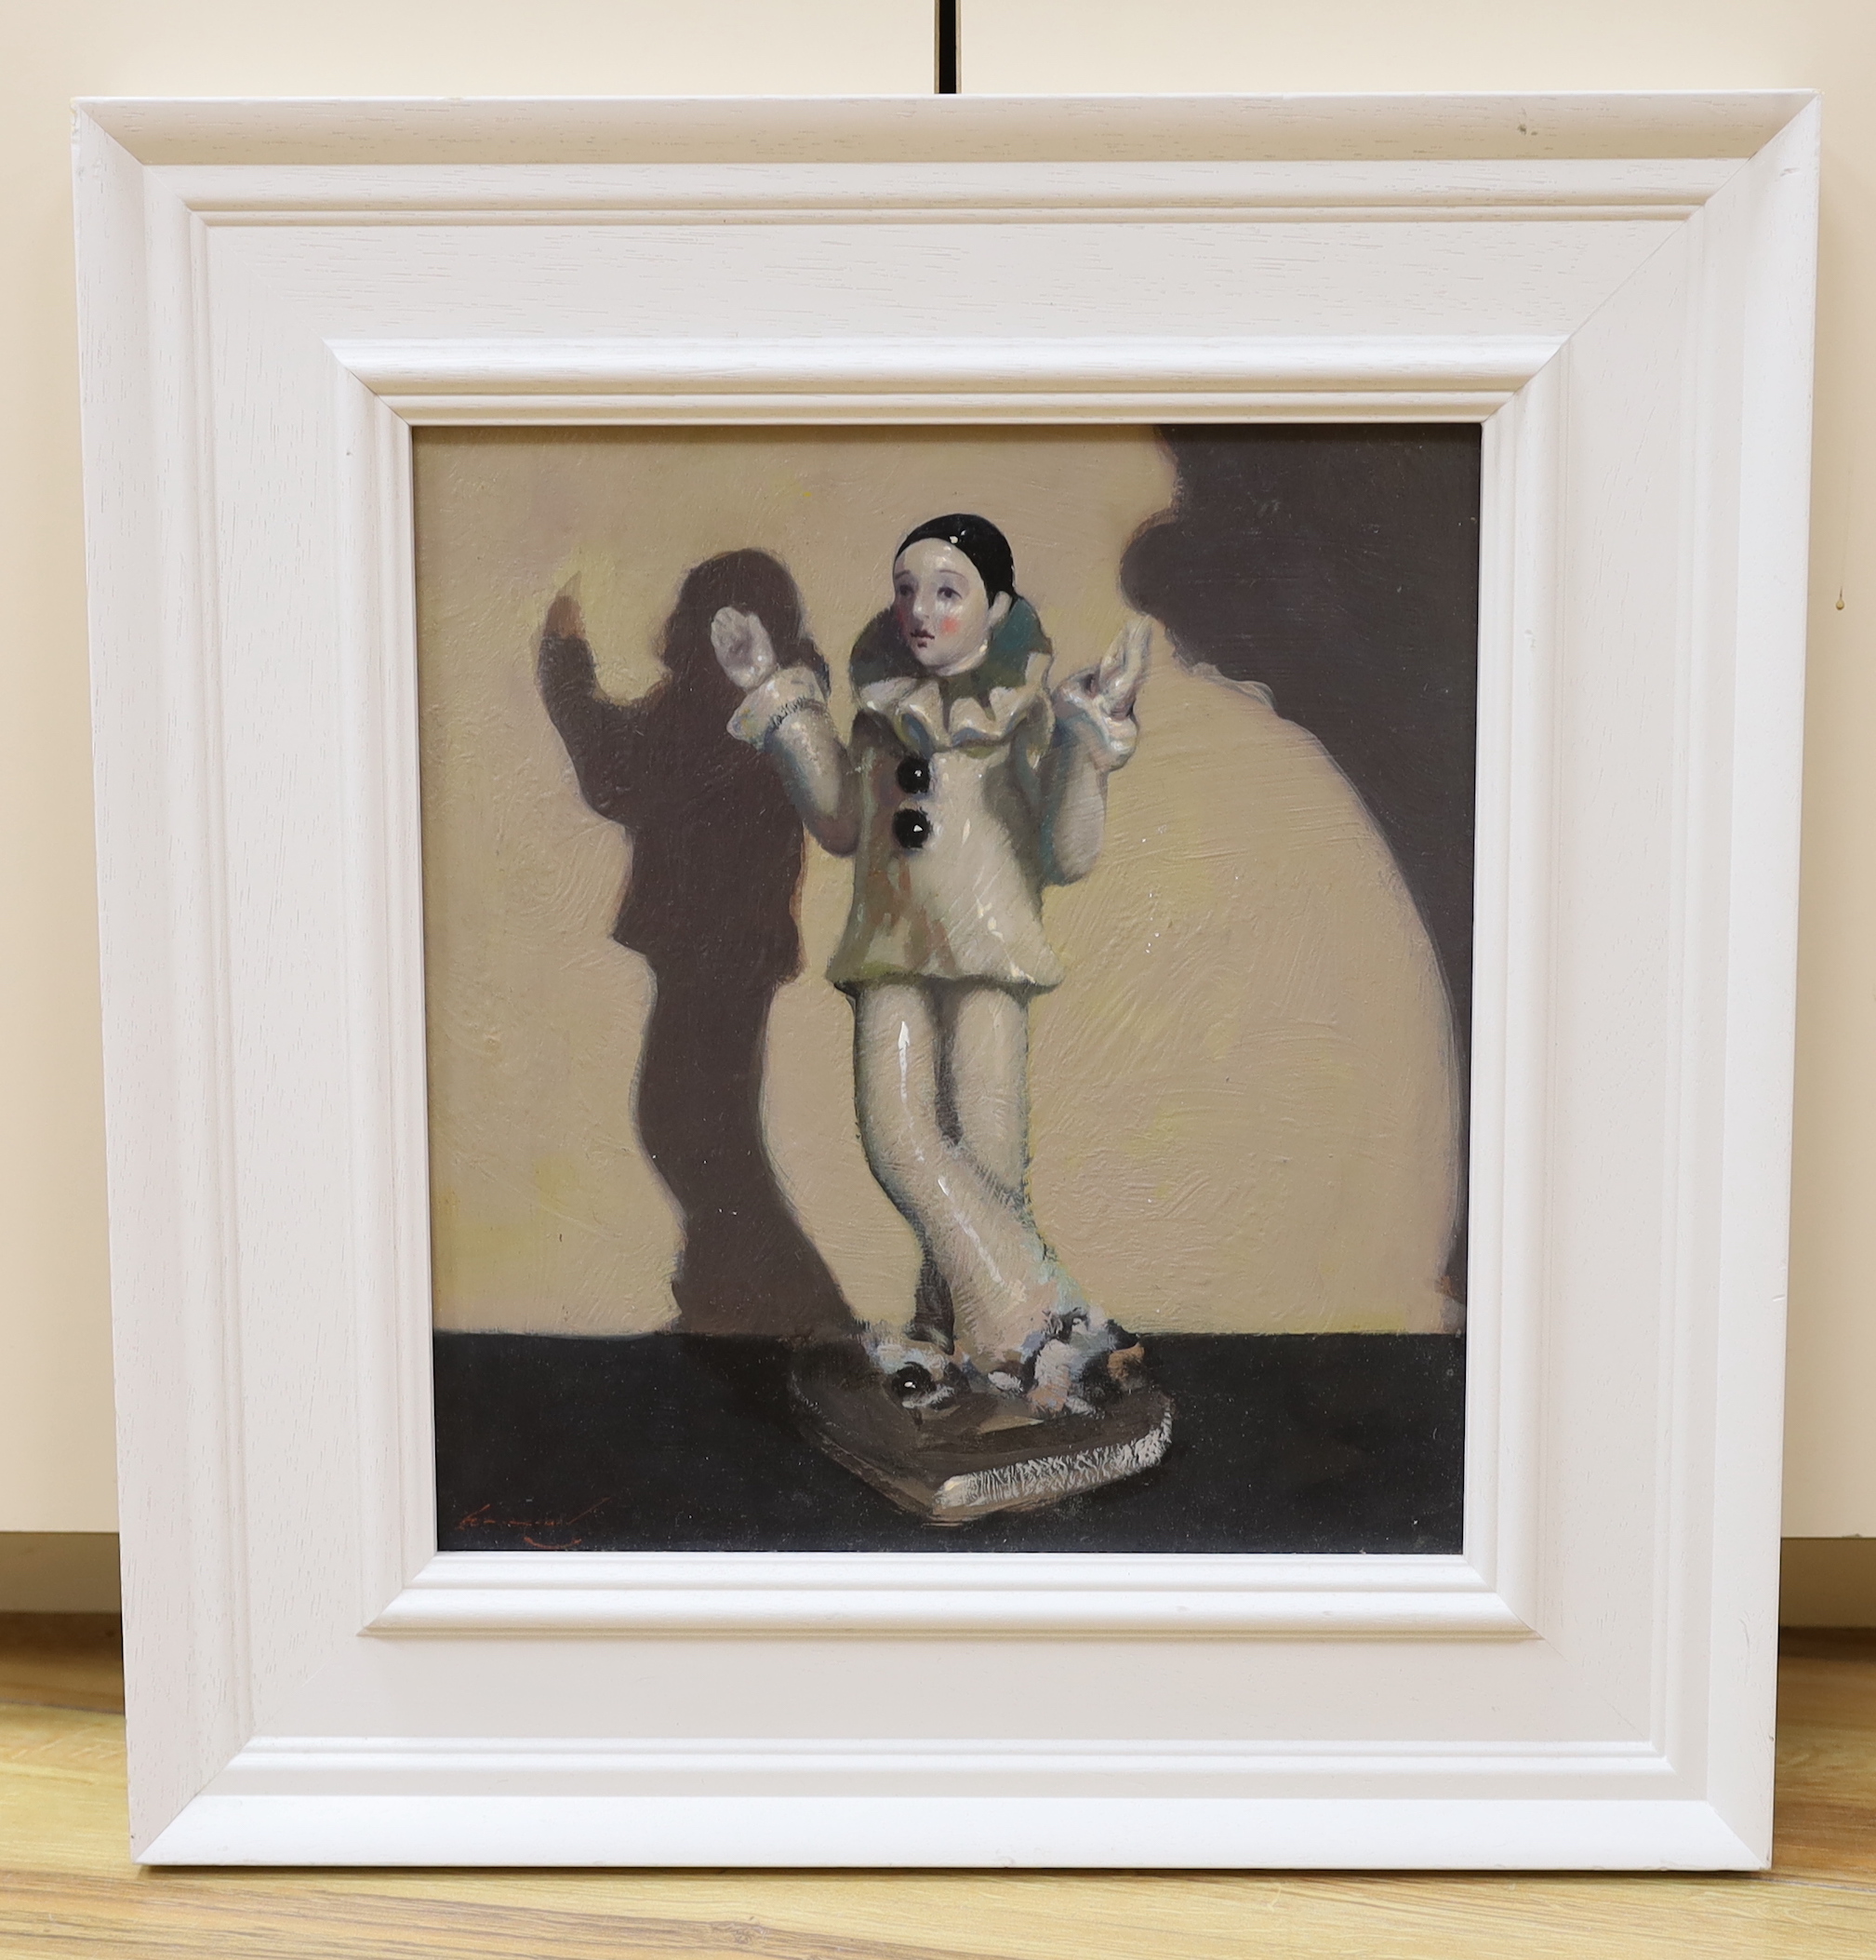 Ken Moroney (1949-2018), oil on board, Study of a Pierrot figurine, signed with Studio stamp verso, 31 x 29cm